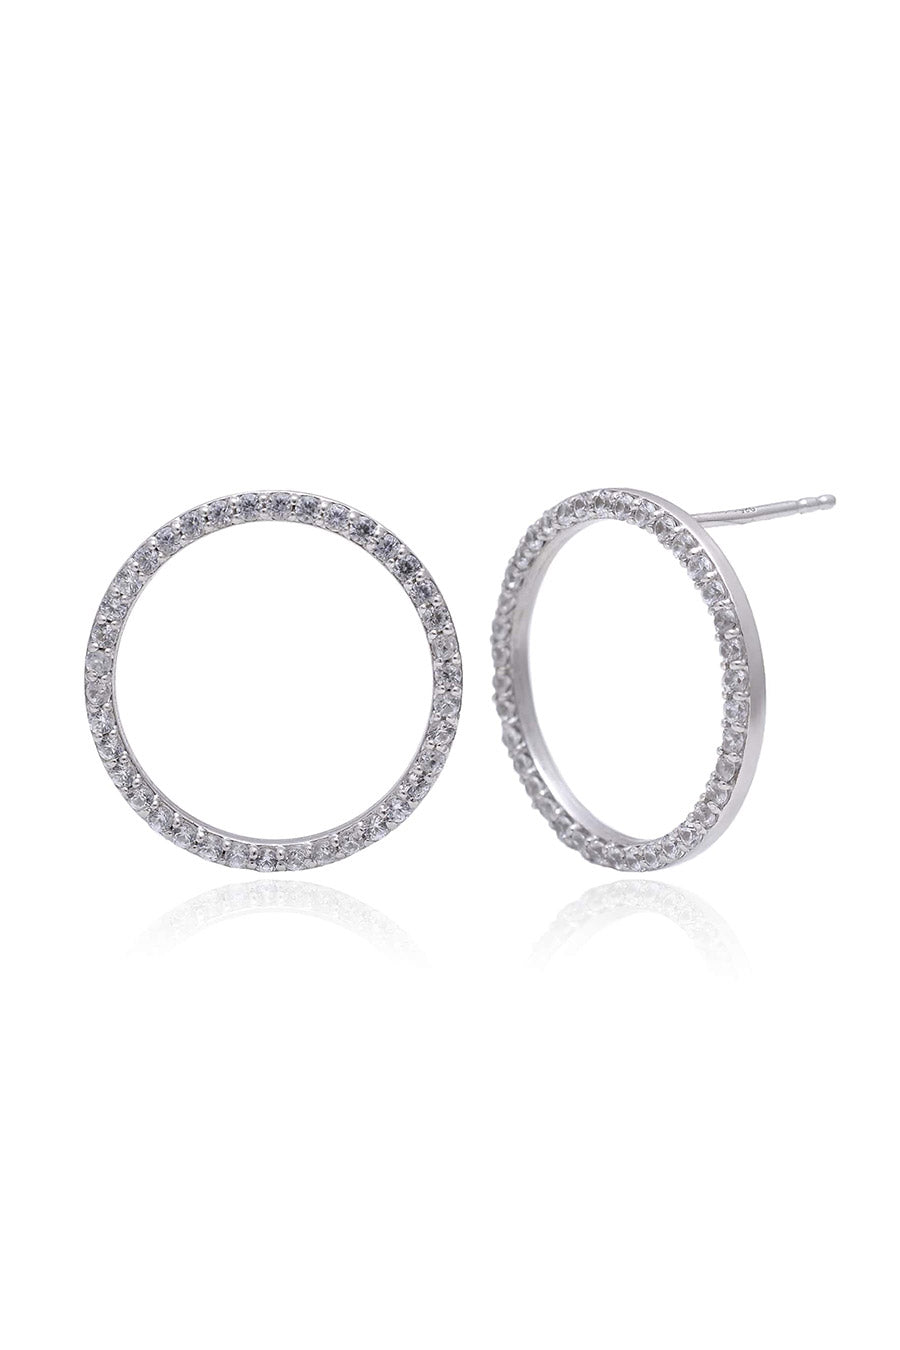 Circle of Life Silver Earrings in 925 Silver